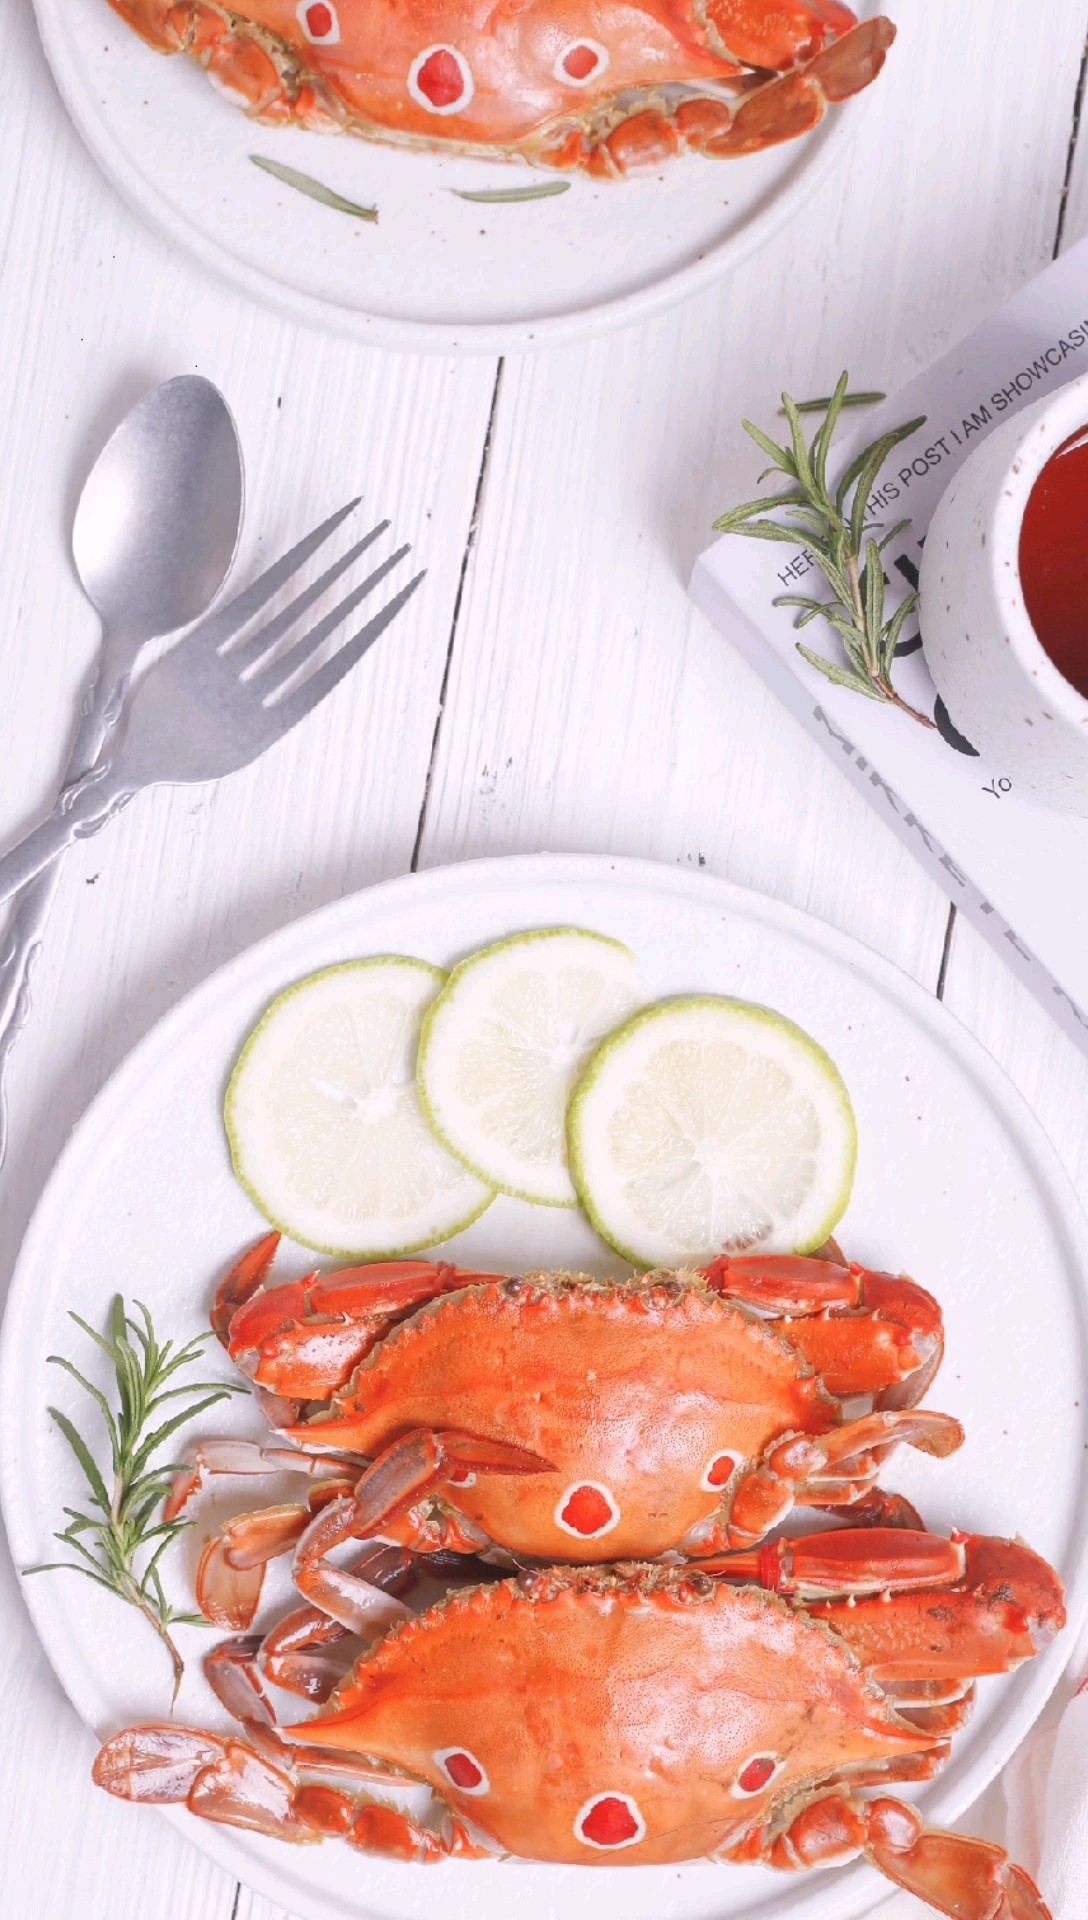 Have You Eaten Crabs Like This?